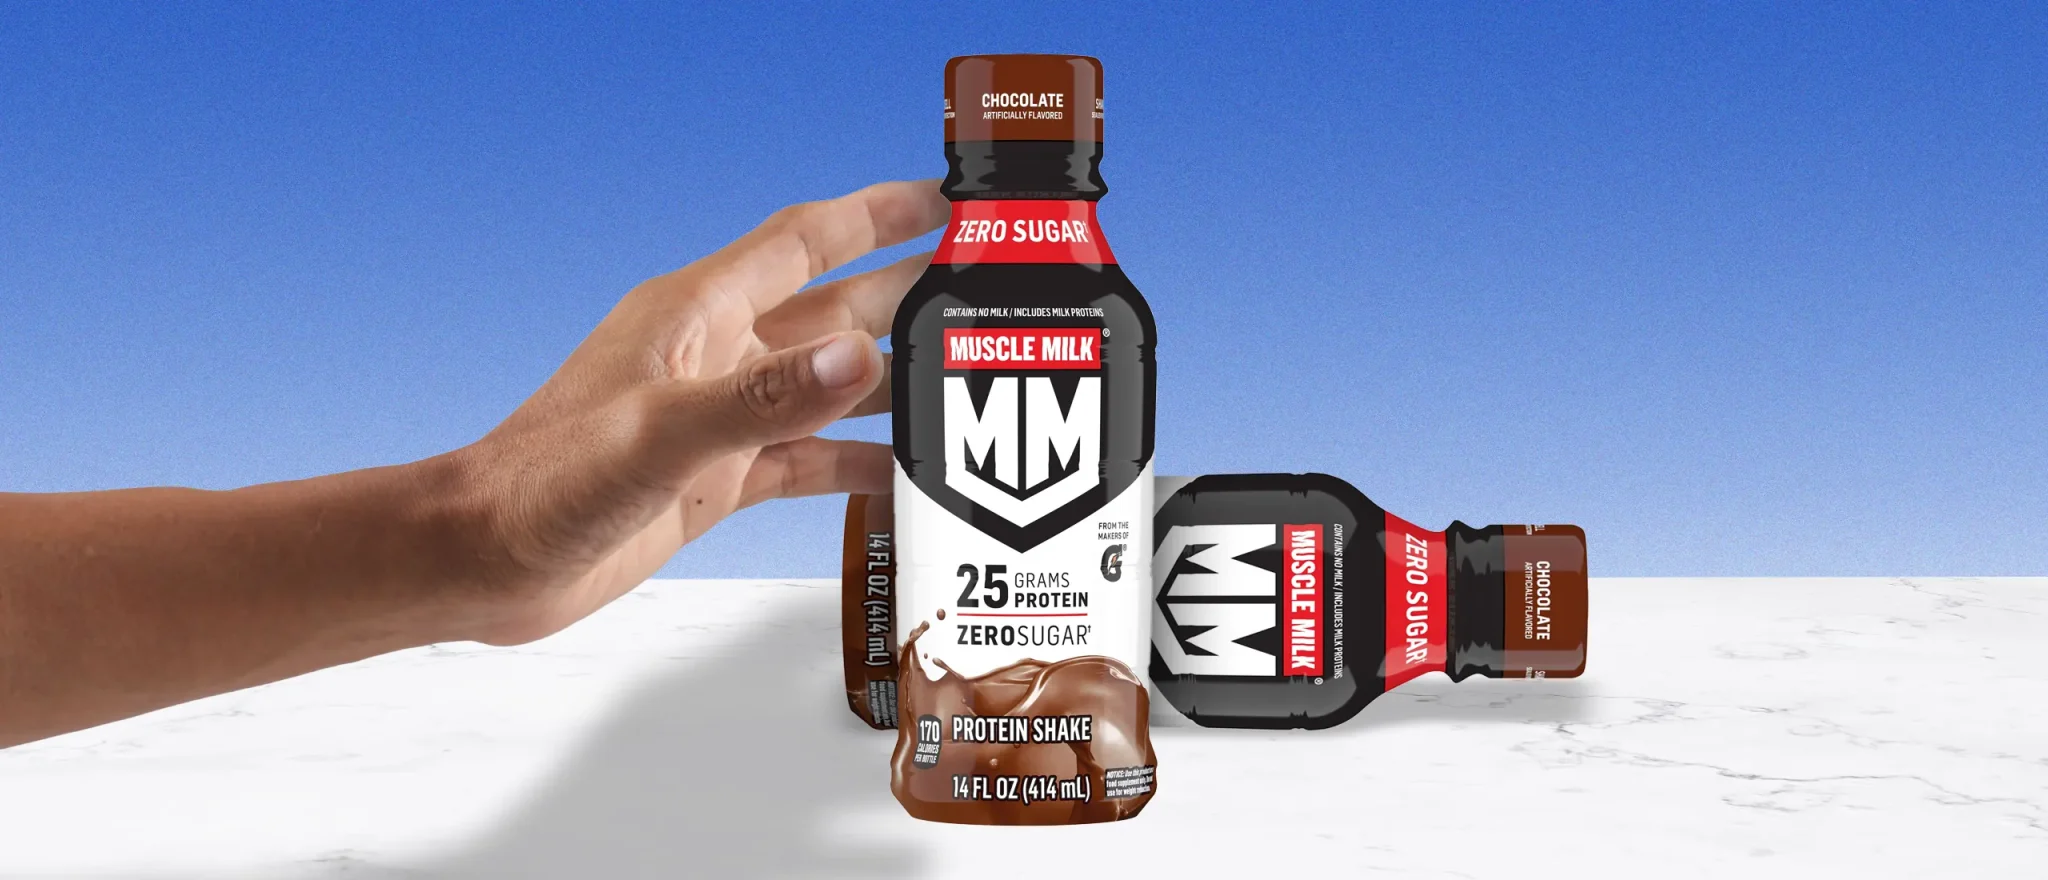 Is Muscle Milk Good For You? Maybe. An R.D. Explains